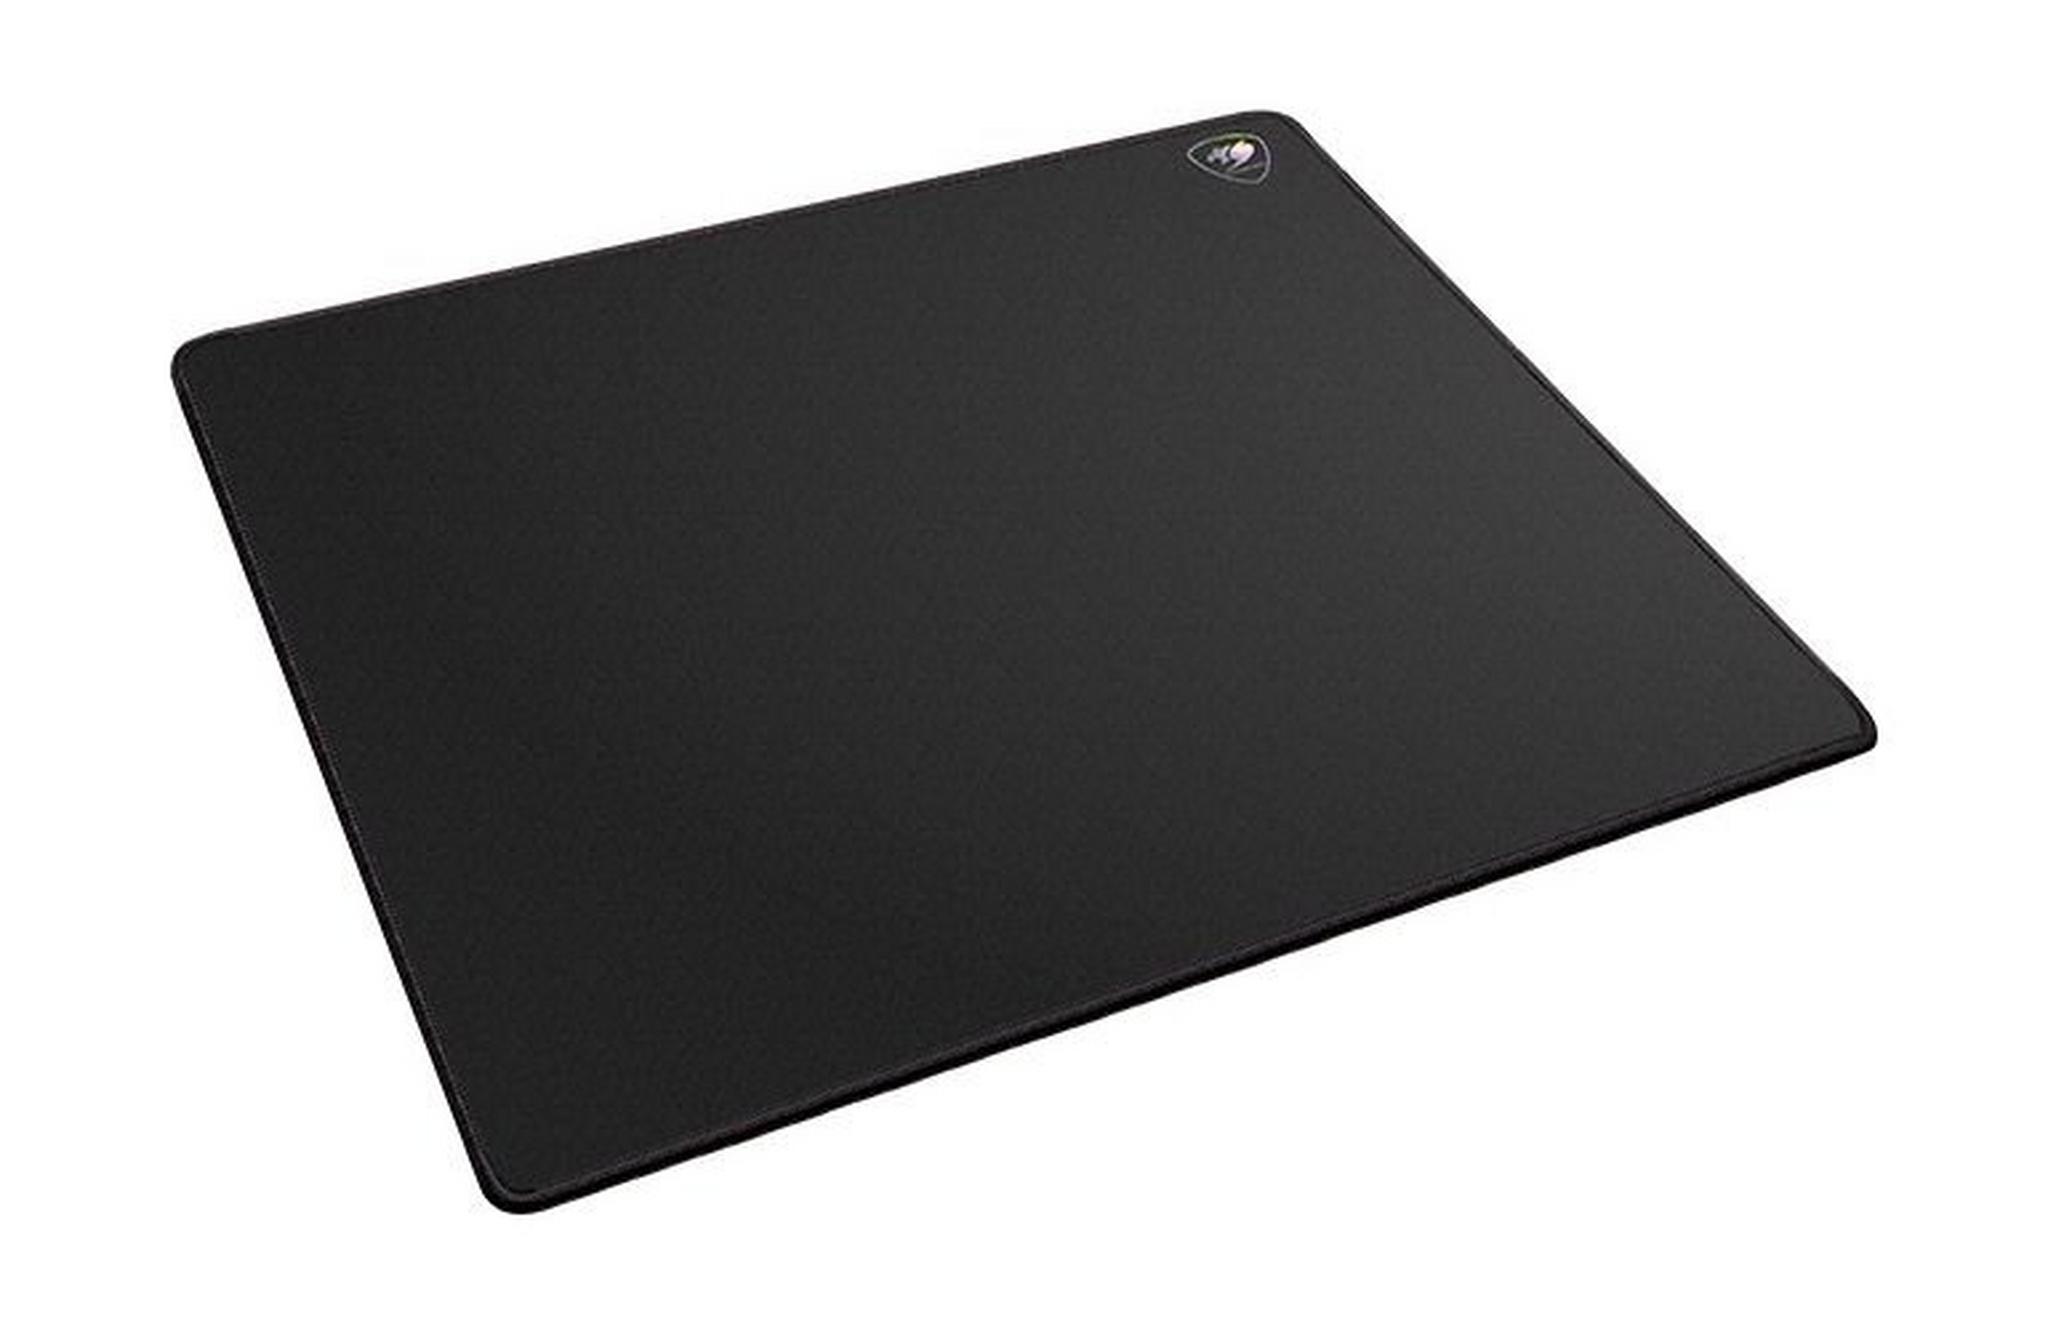 Cougar SPEED EX Gaming Mouse Pad - Black/Large